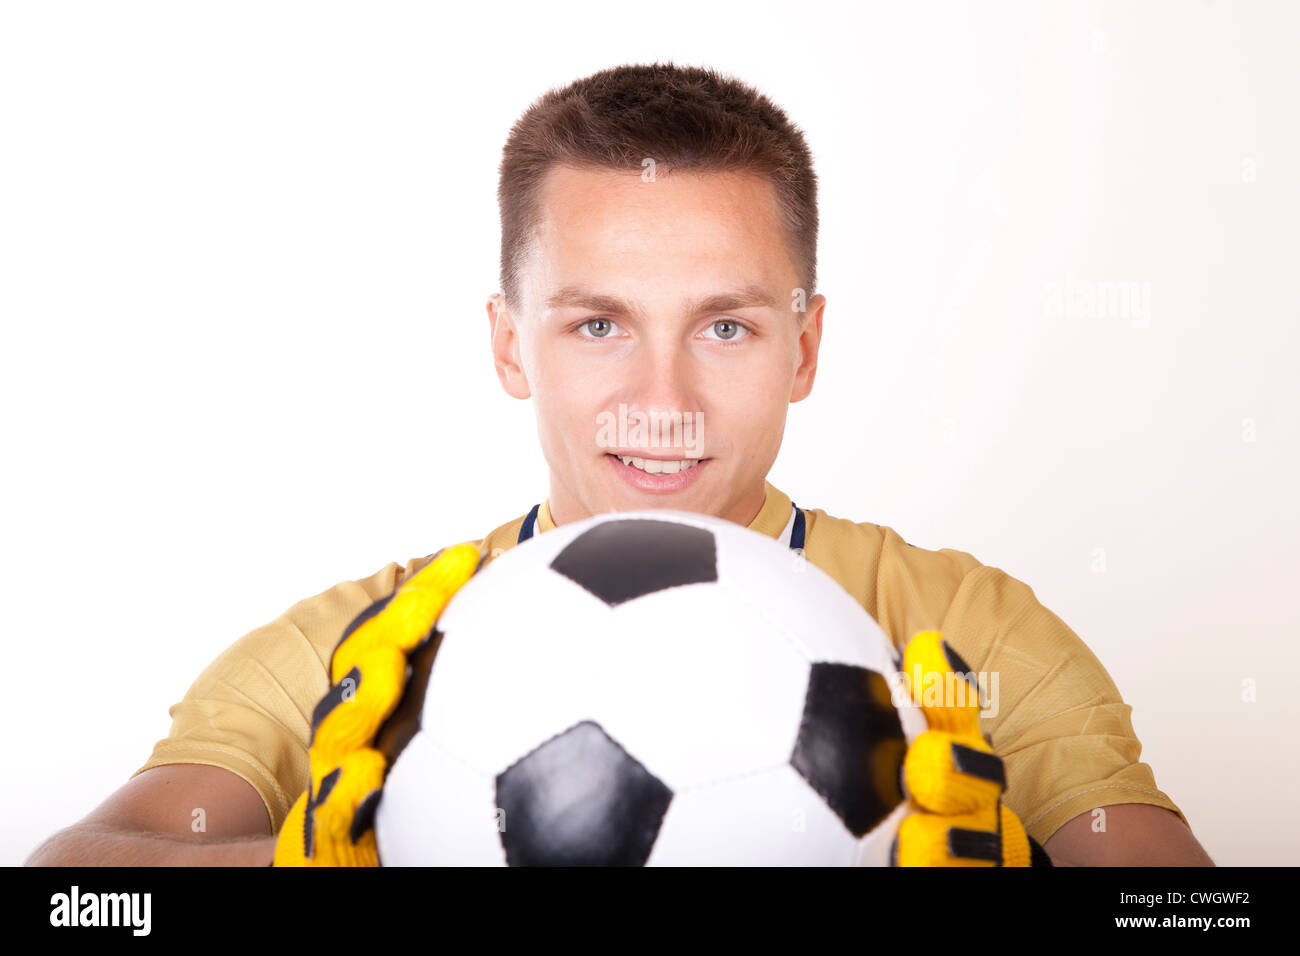 Young man goalkeeper holding a ball. Stock Photo